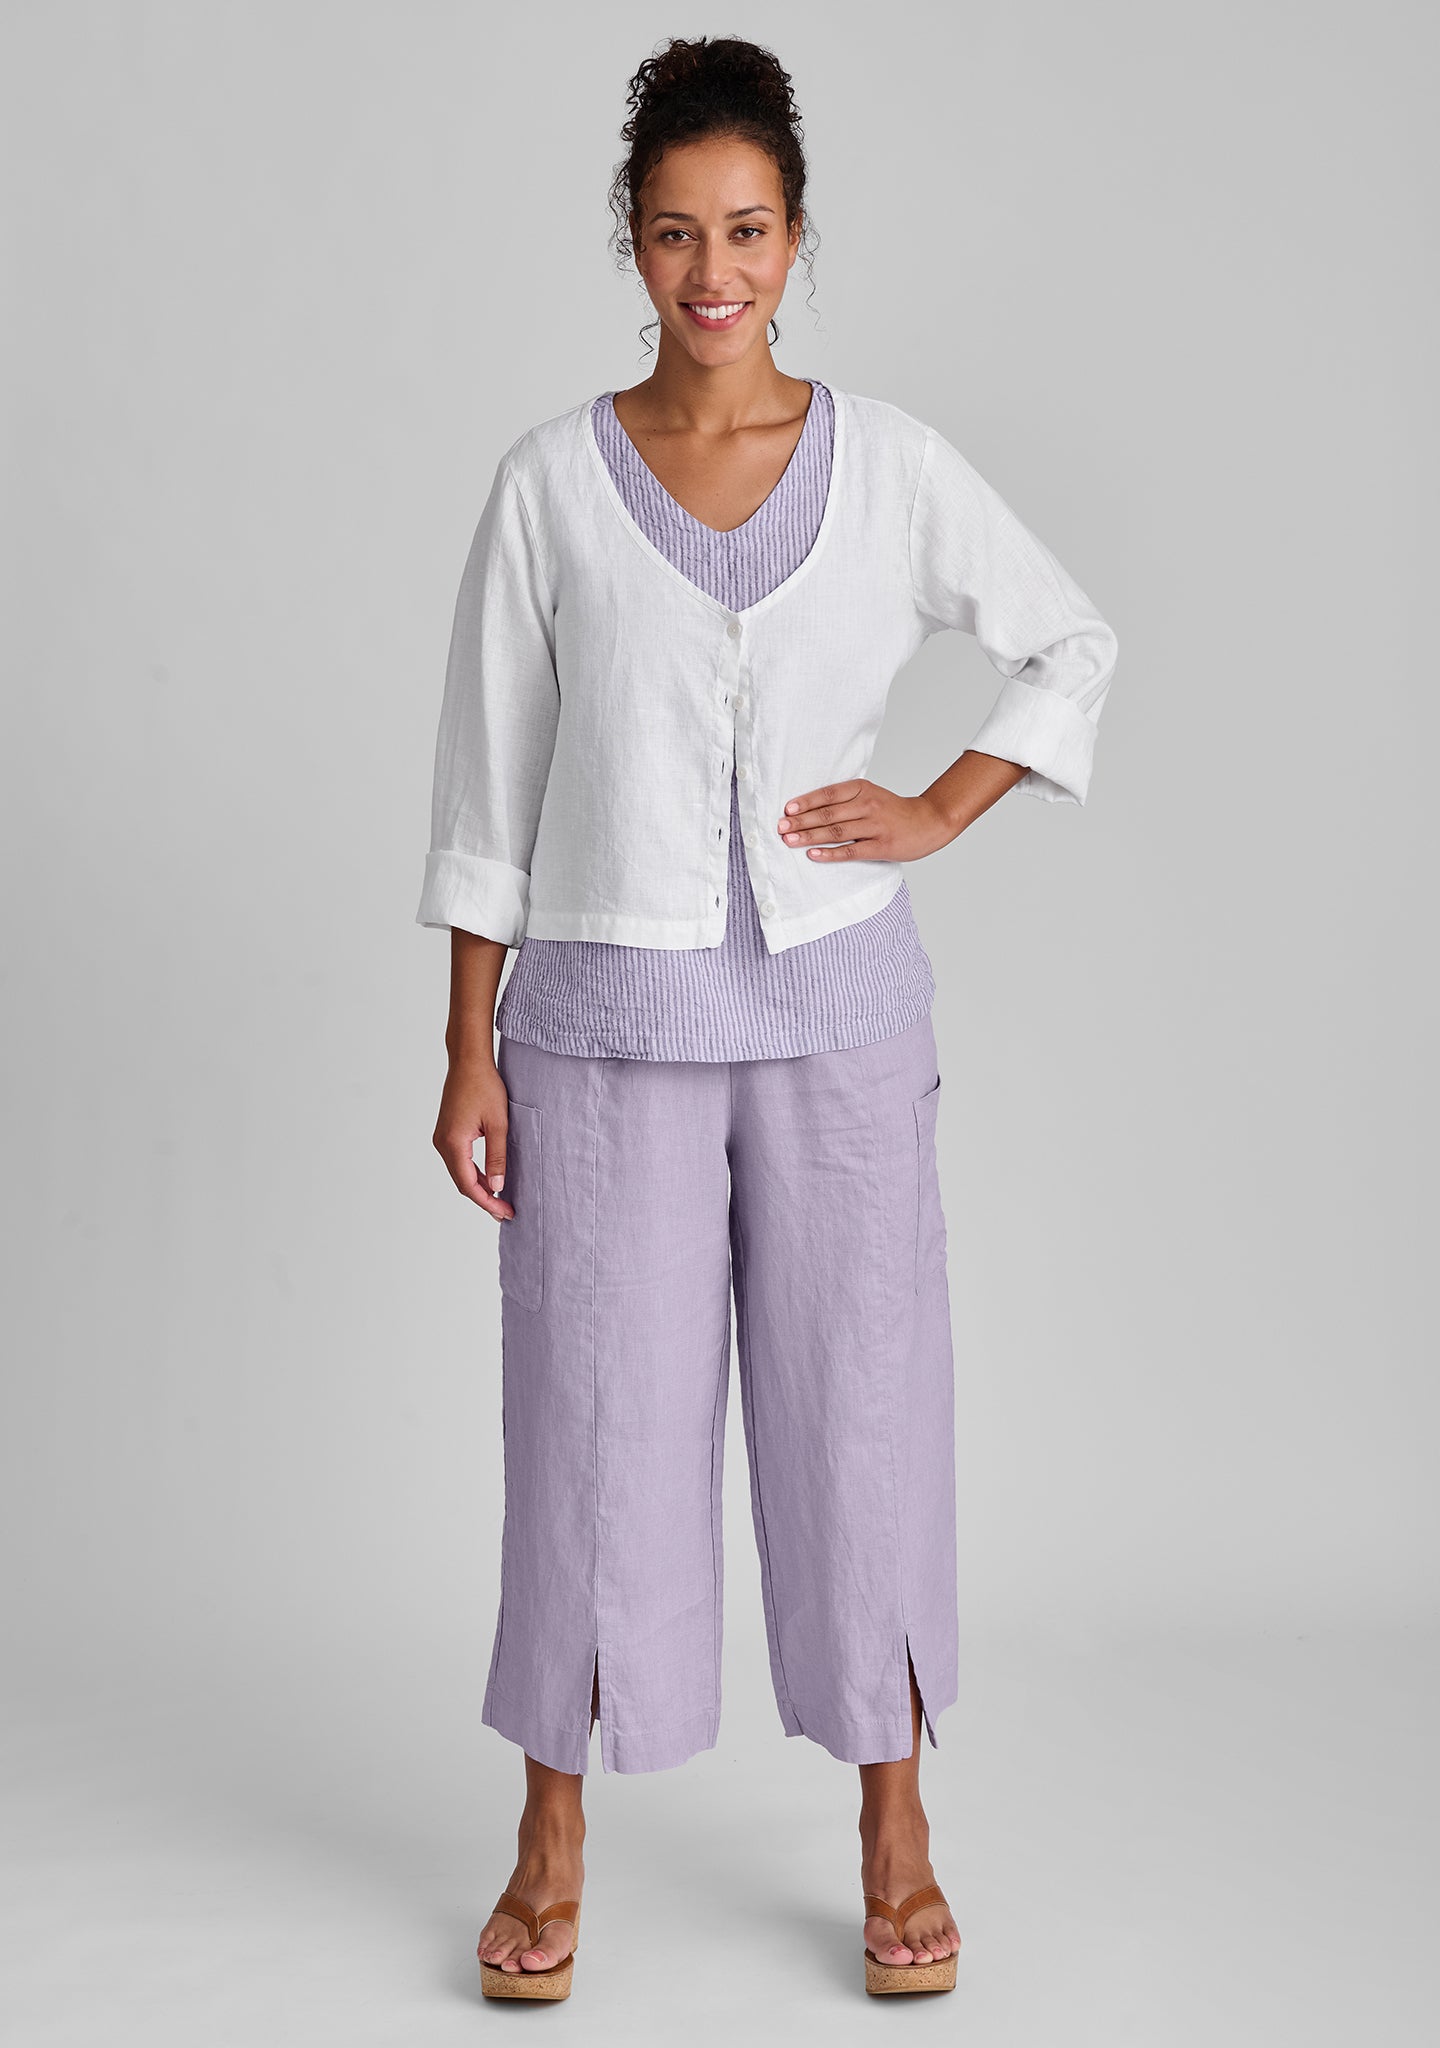 FLAX linen blouse in white and linen tank in purple and linen pants in purple